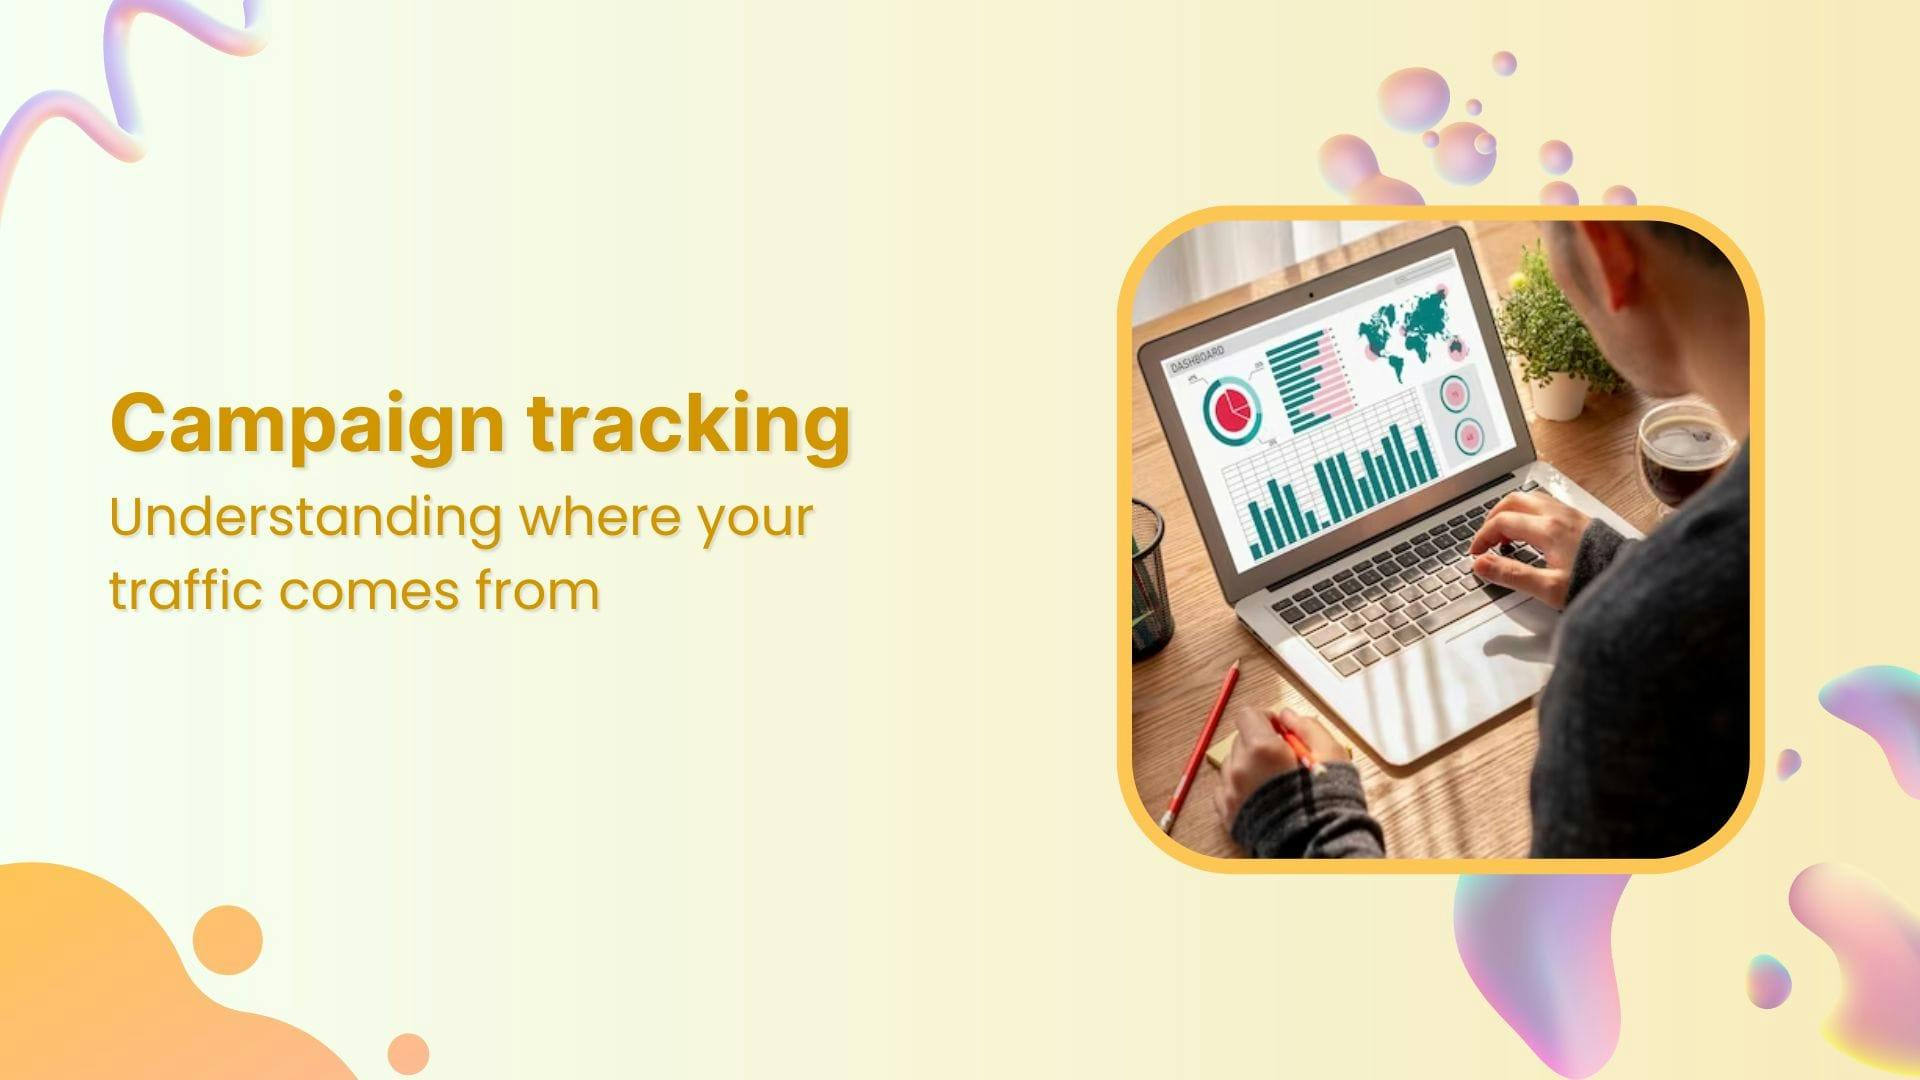 Campaign tracking: Understanding where your traffic comes from